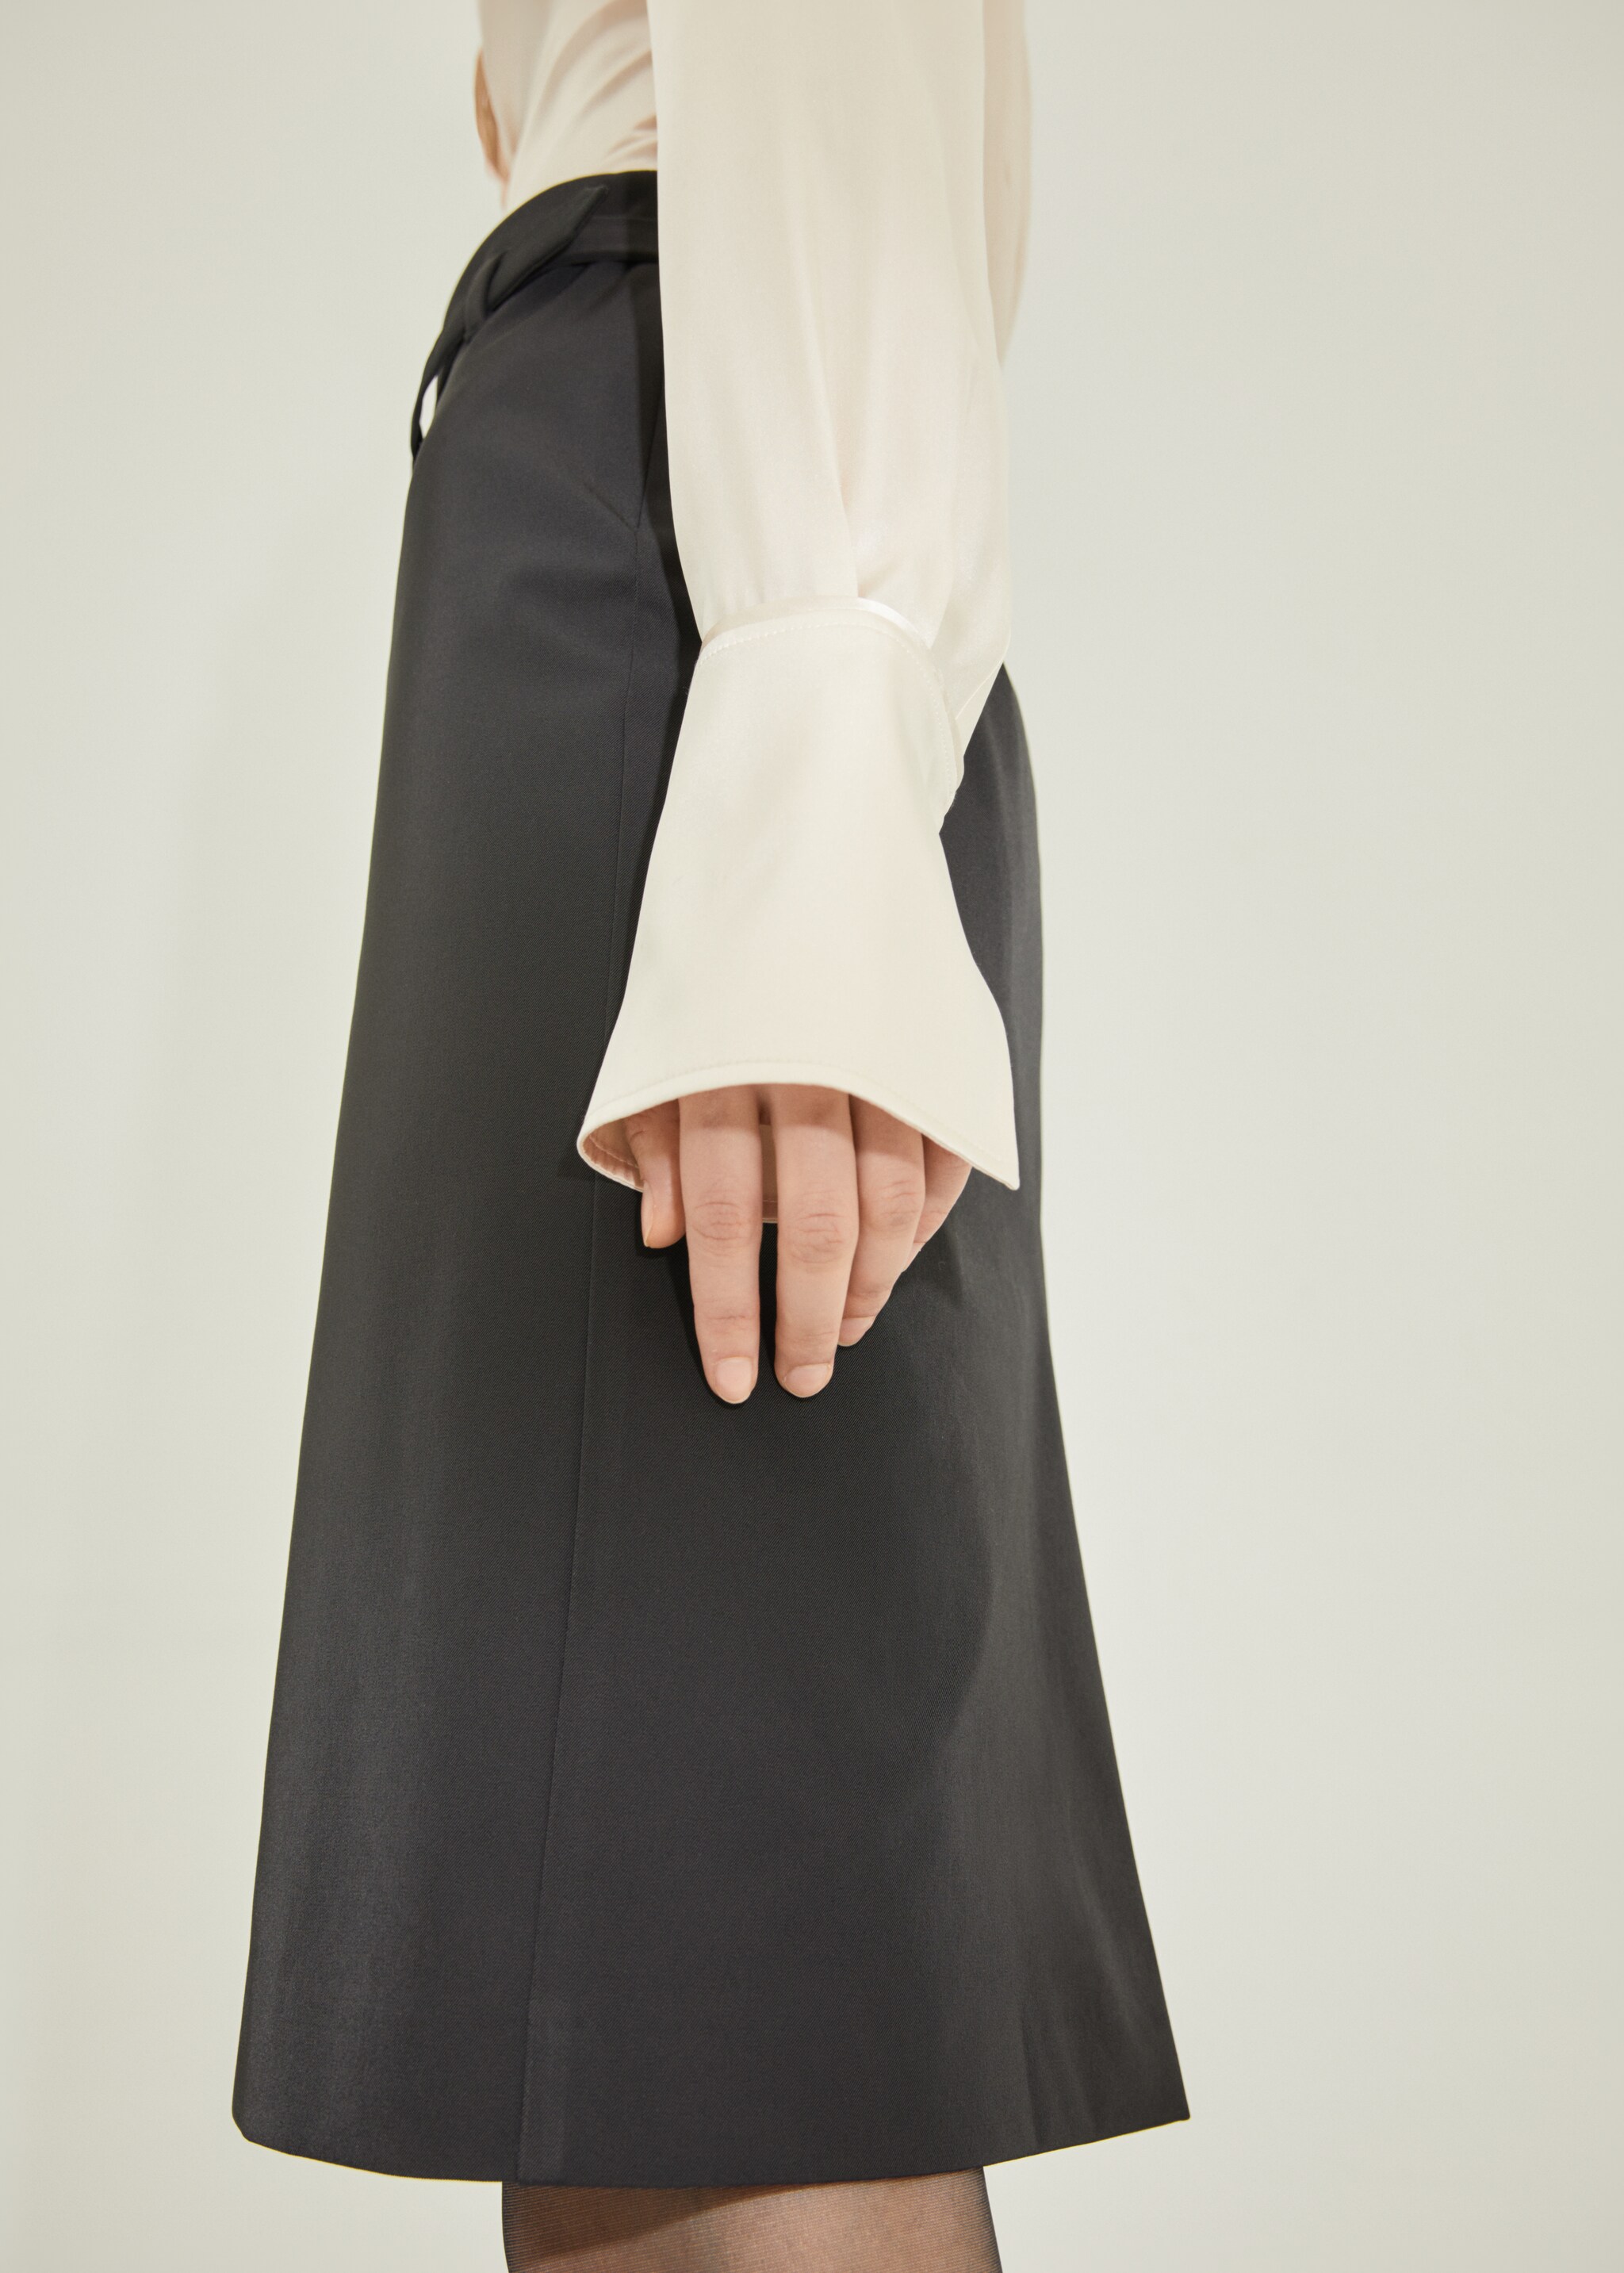 Silk shirt with side drape - Details of the article 6